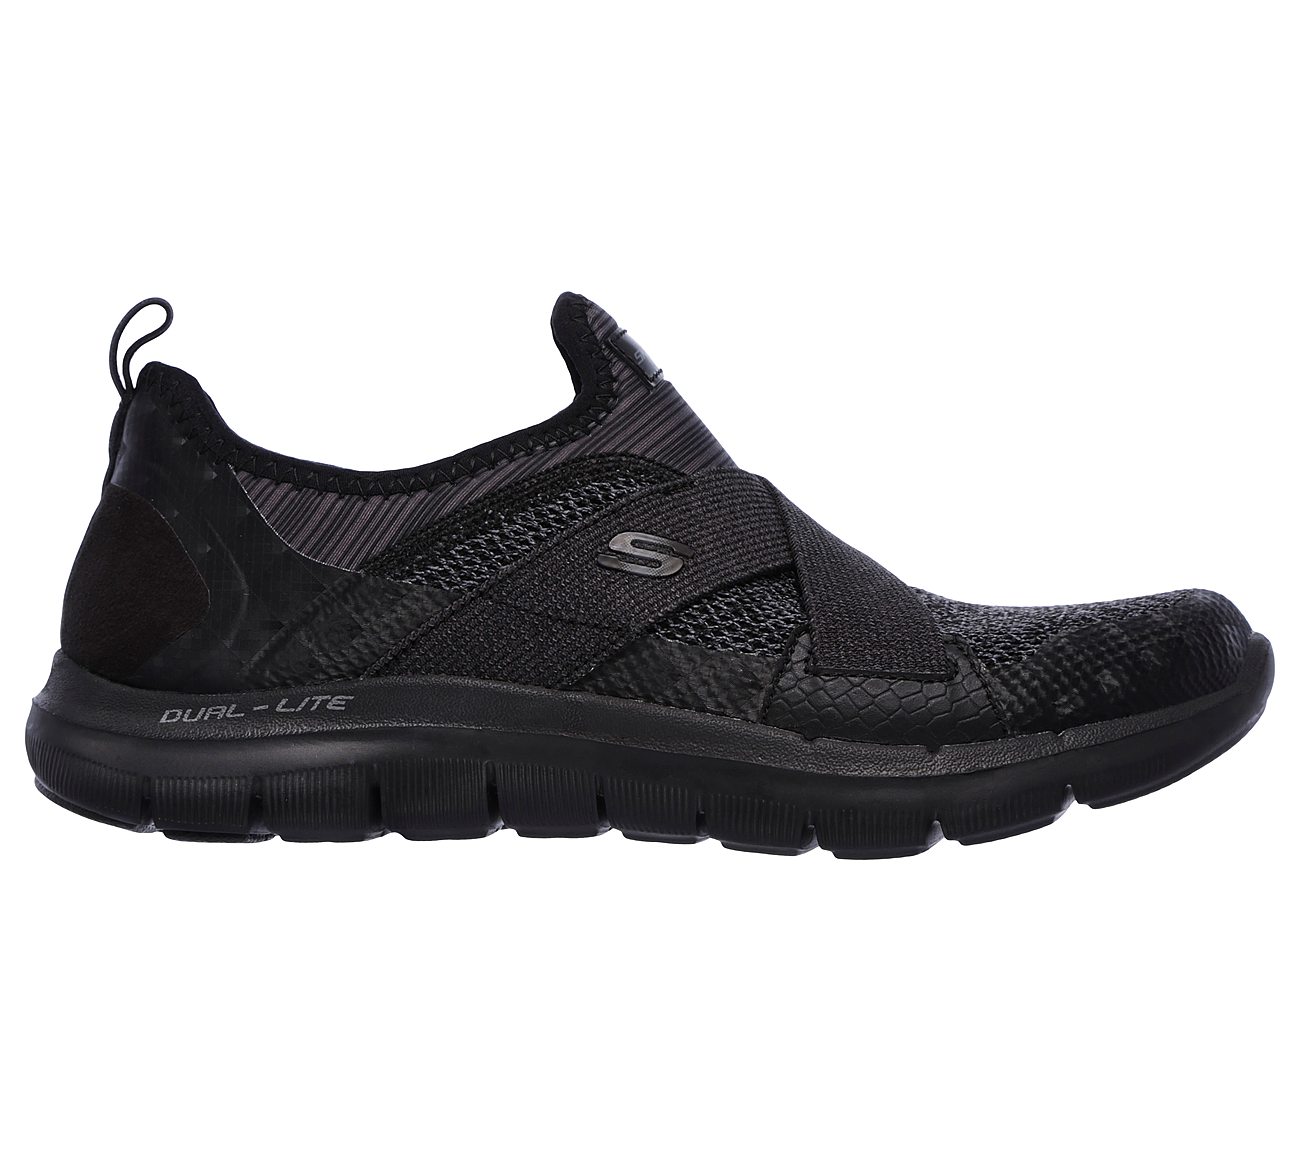 Buy new skechers shoes > OFF64% Discounted